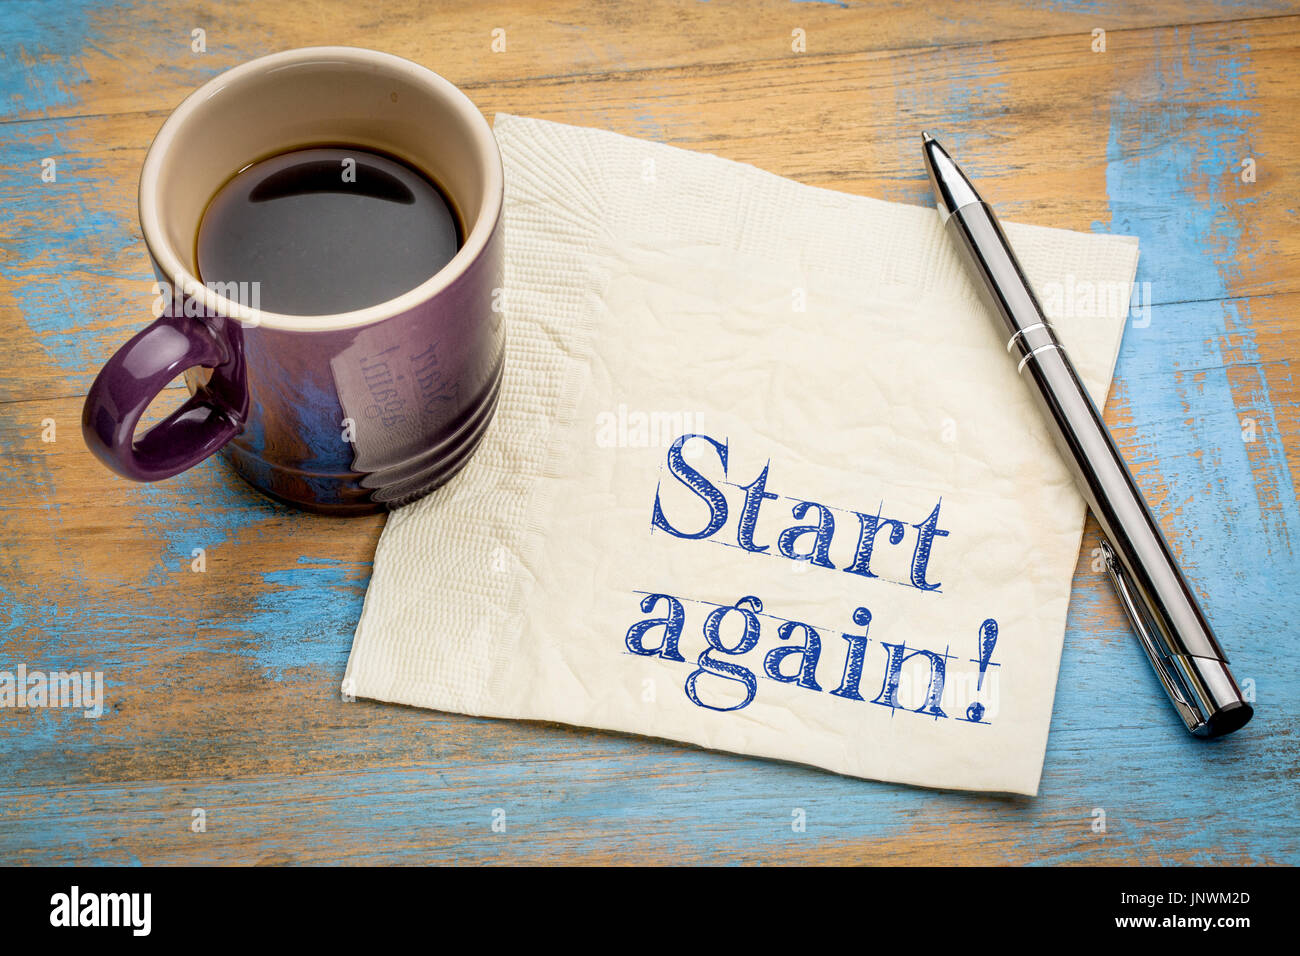 Start again motivational reminder or advice - handwriting on a napkin with a cup of espresso coffee Stock Photo